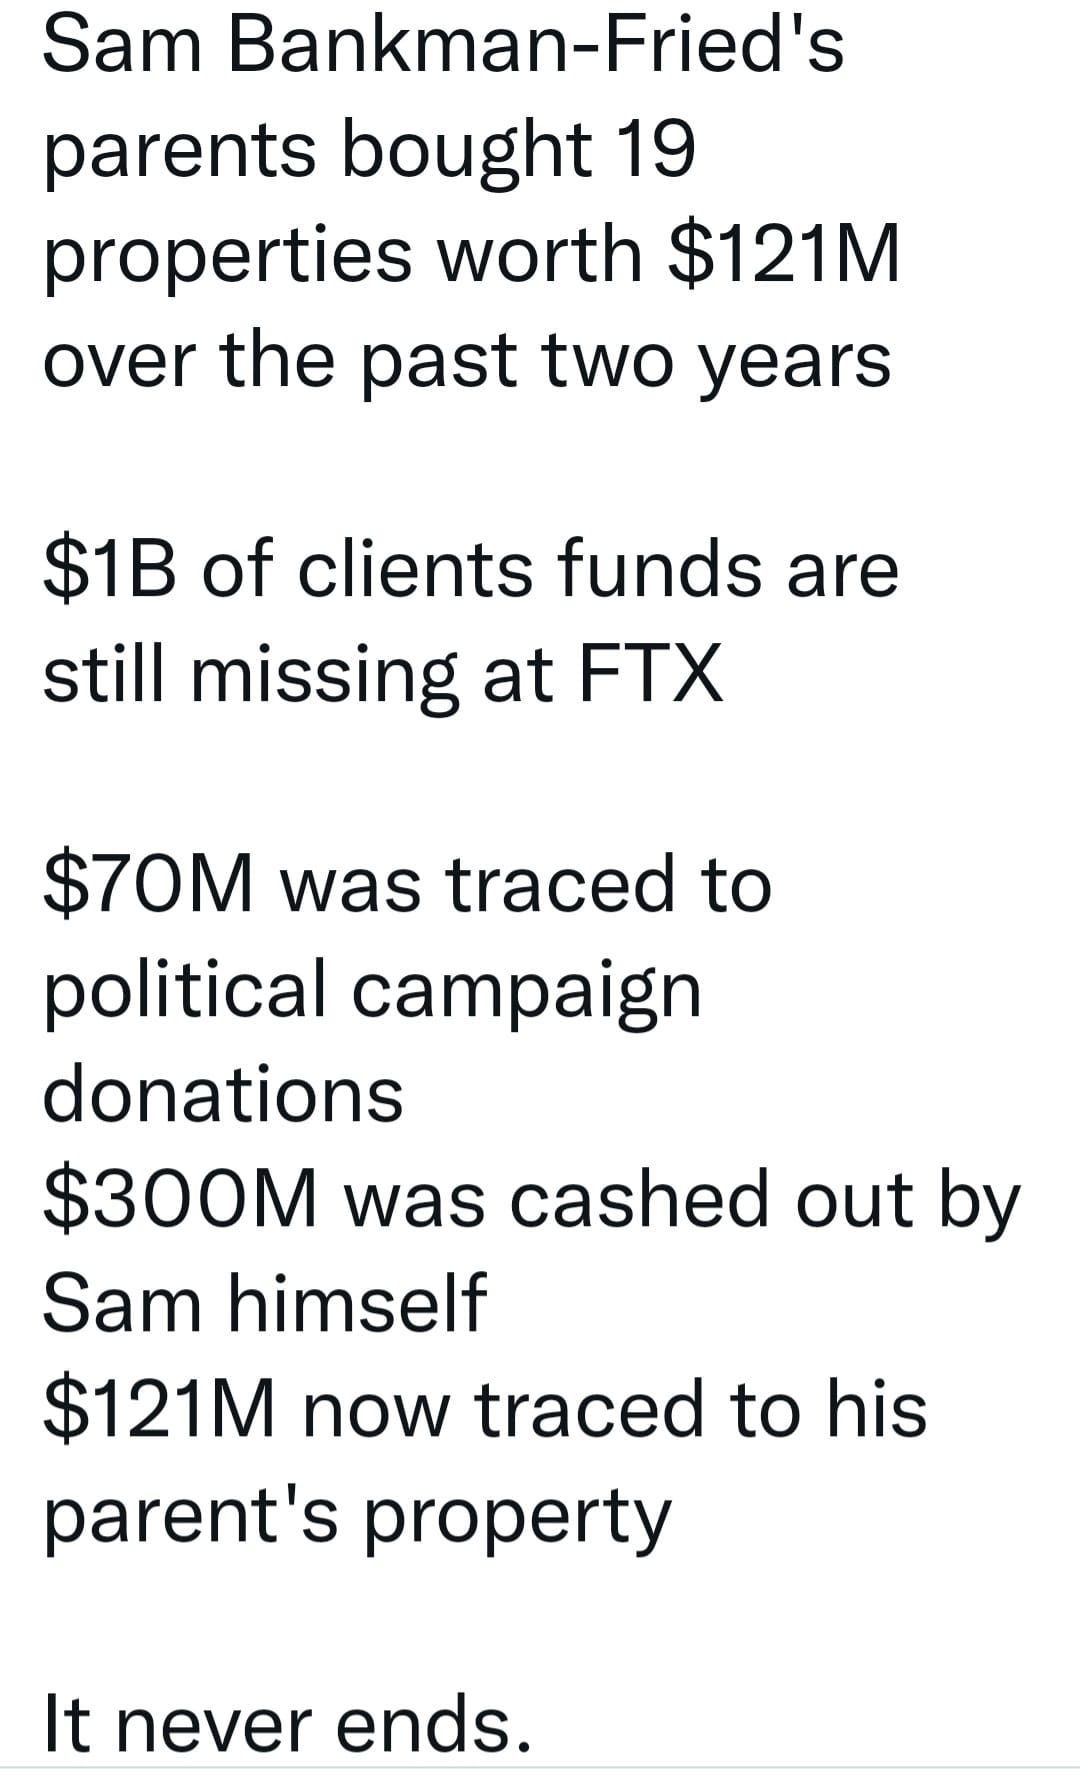 May be an image of text that says 'Sam Bankman-Fried's parents bought 19 properties worth $121M over the past two years $1B of of clients funds are still missing at FTX $70M was traced to political campaign donations $300M was cashed out by Sam himself $121M now traced to his parent's property It never ends.'